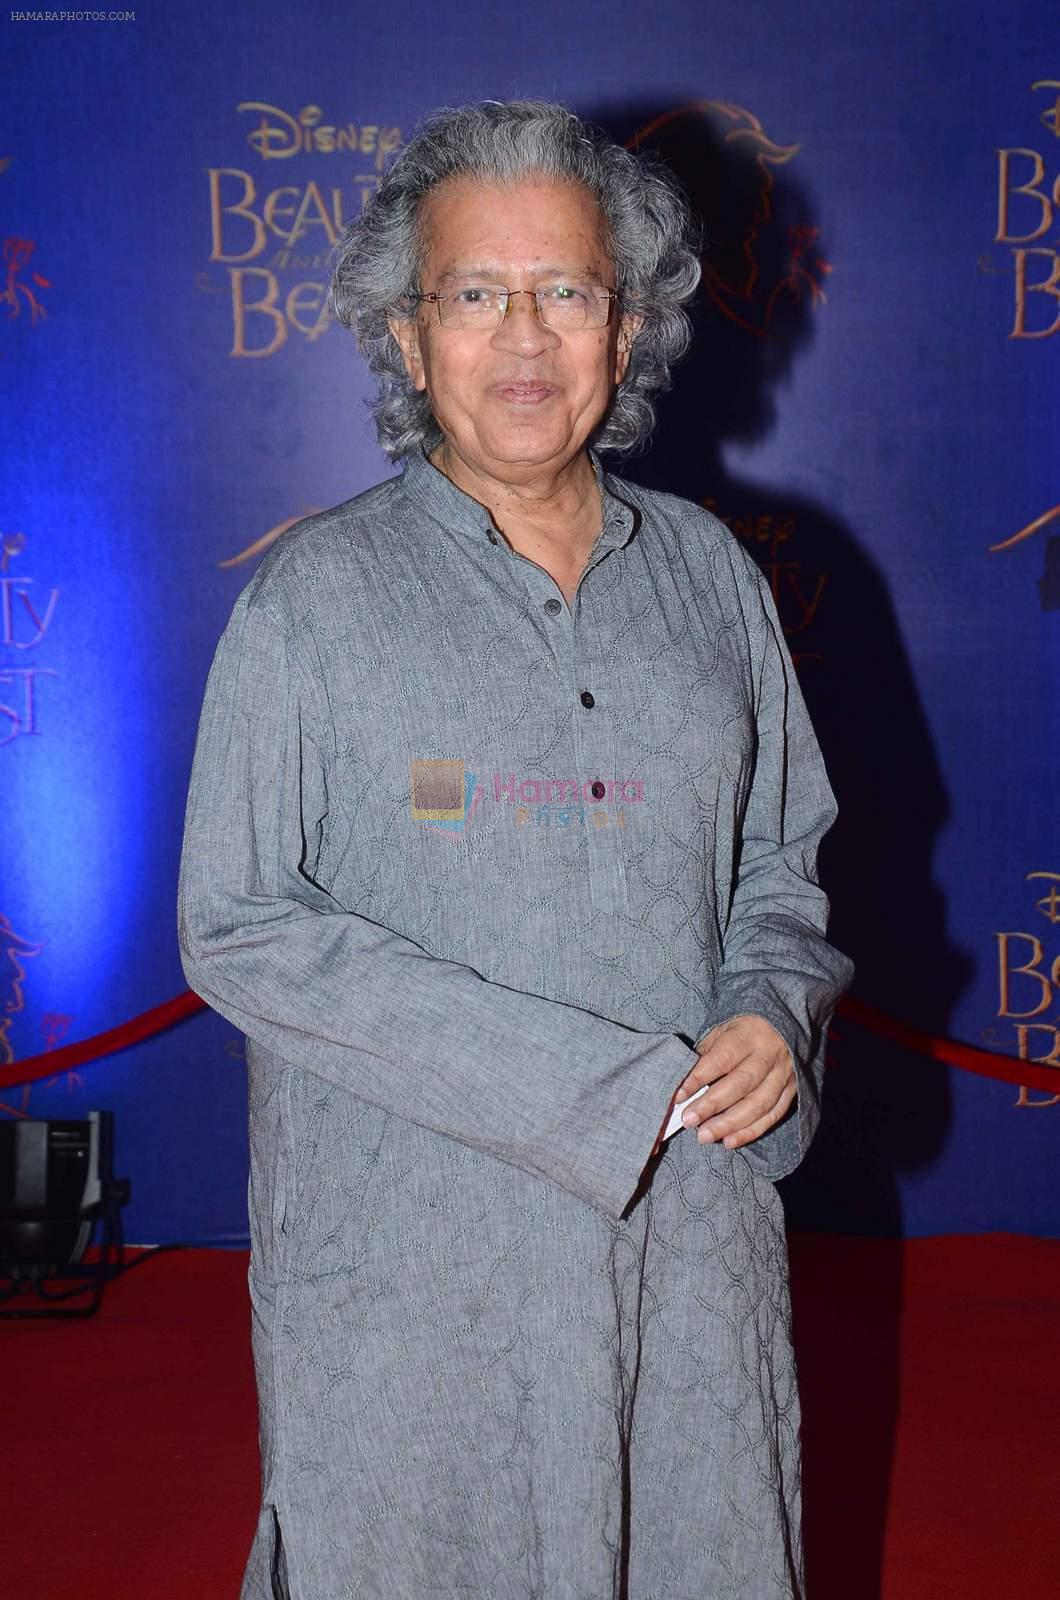 Anil Dharkar at Beauty and the Beast red carpet in Mumbai on 21st Oct 2015